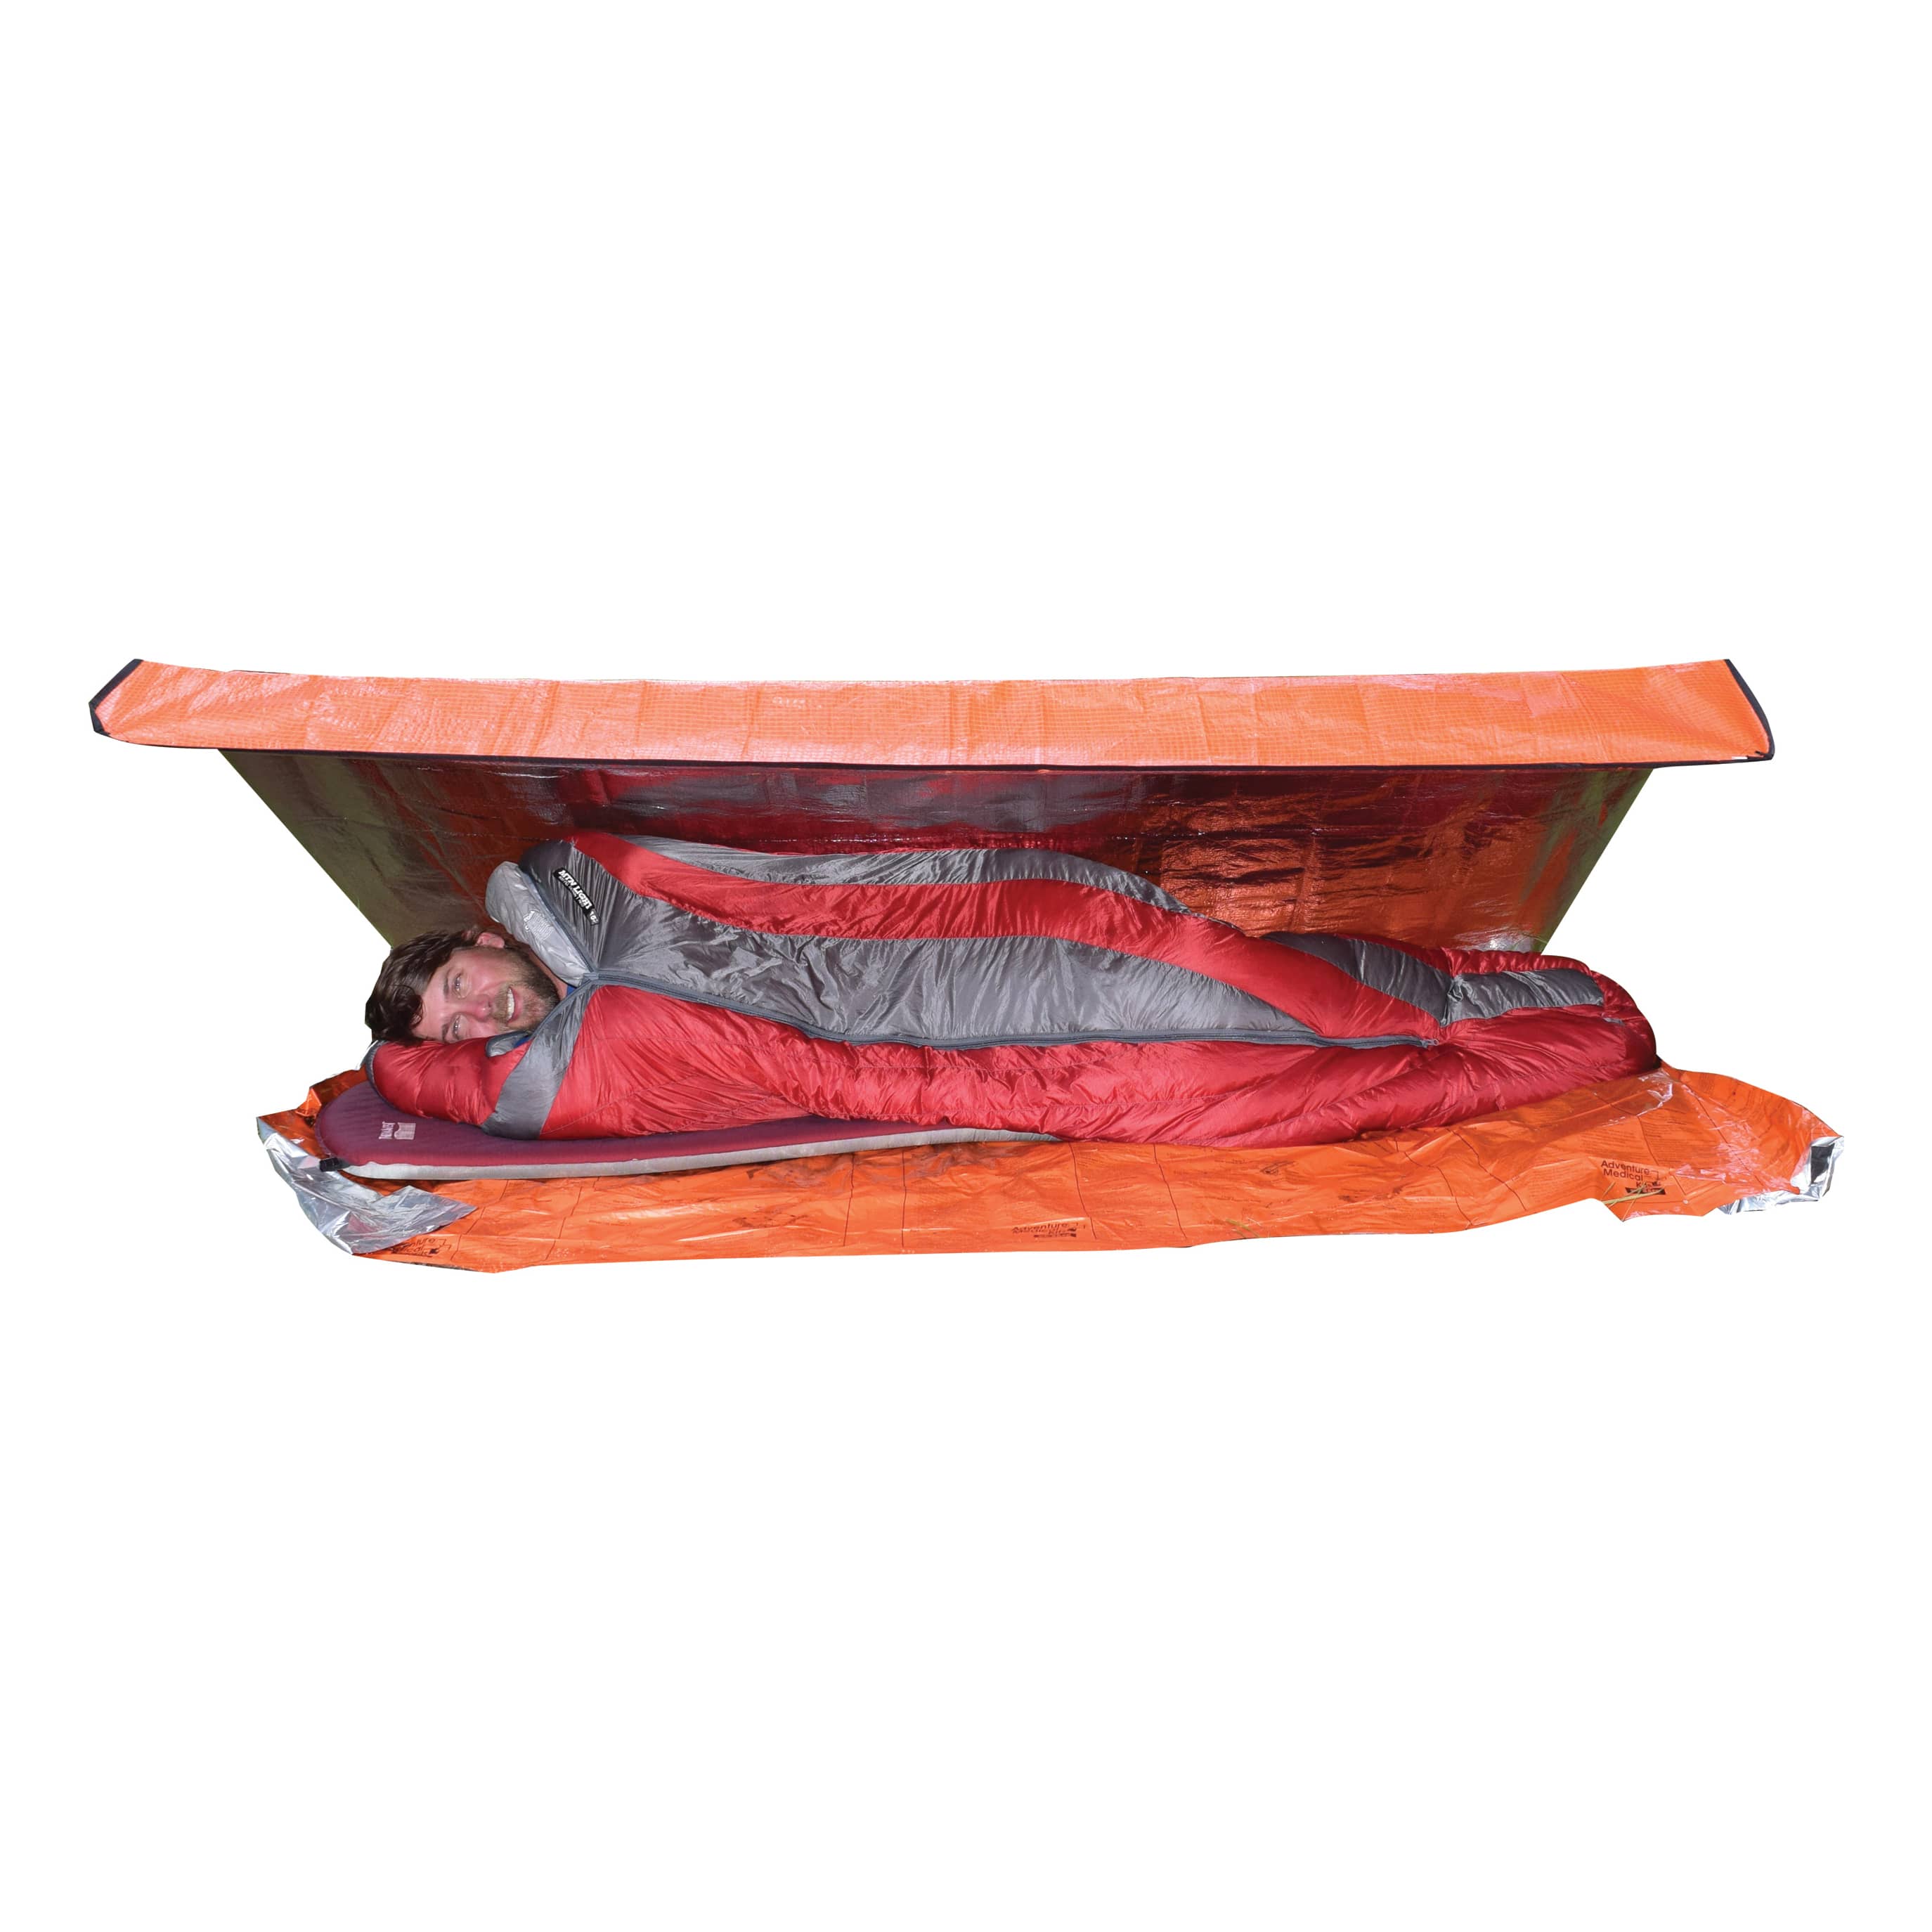 SOL All Season Blanket - Used As An Emergency Shelter